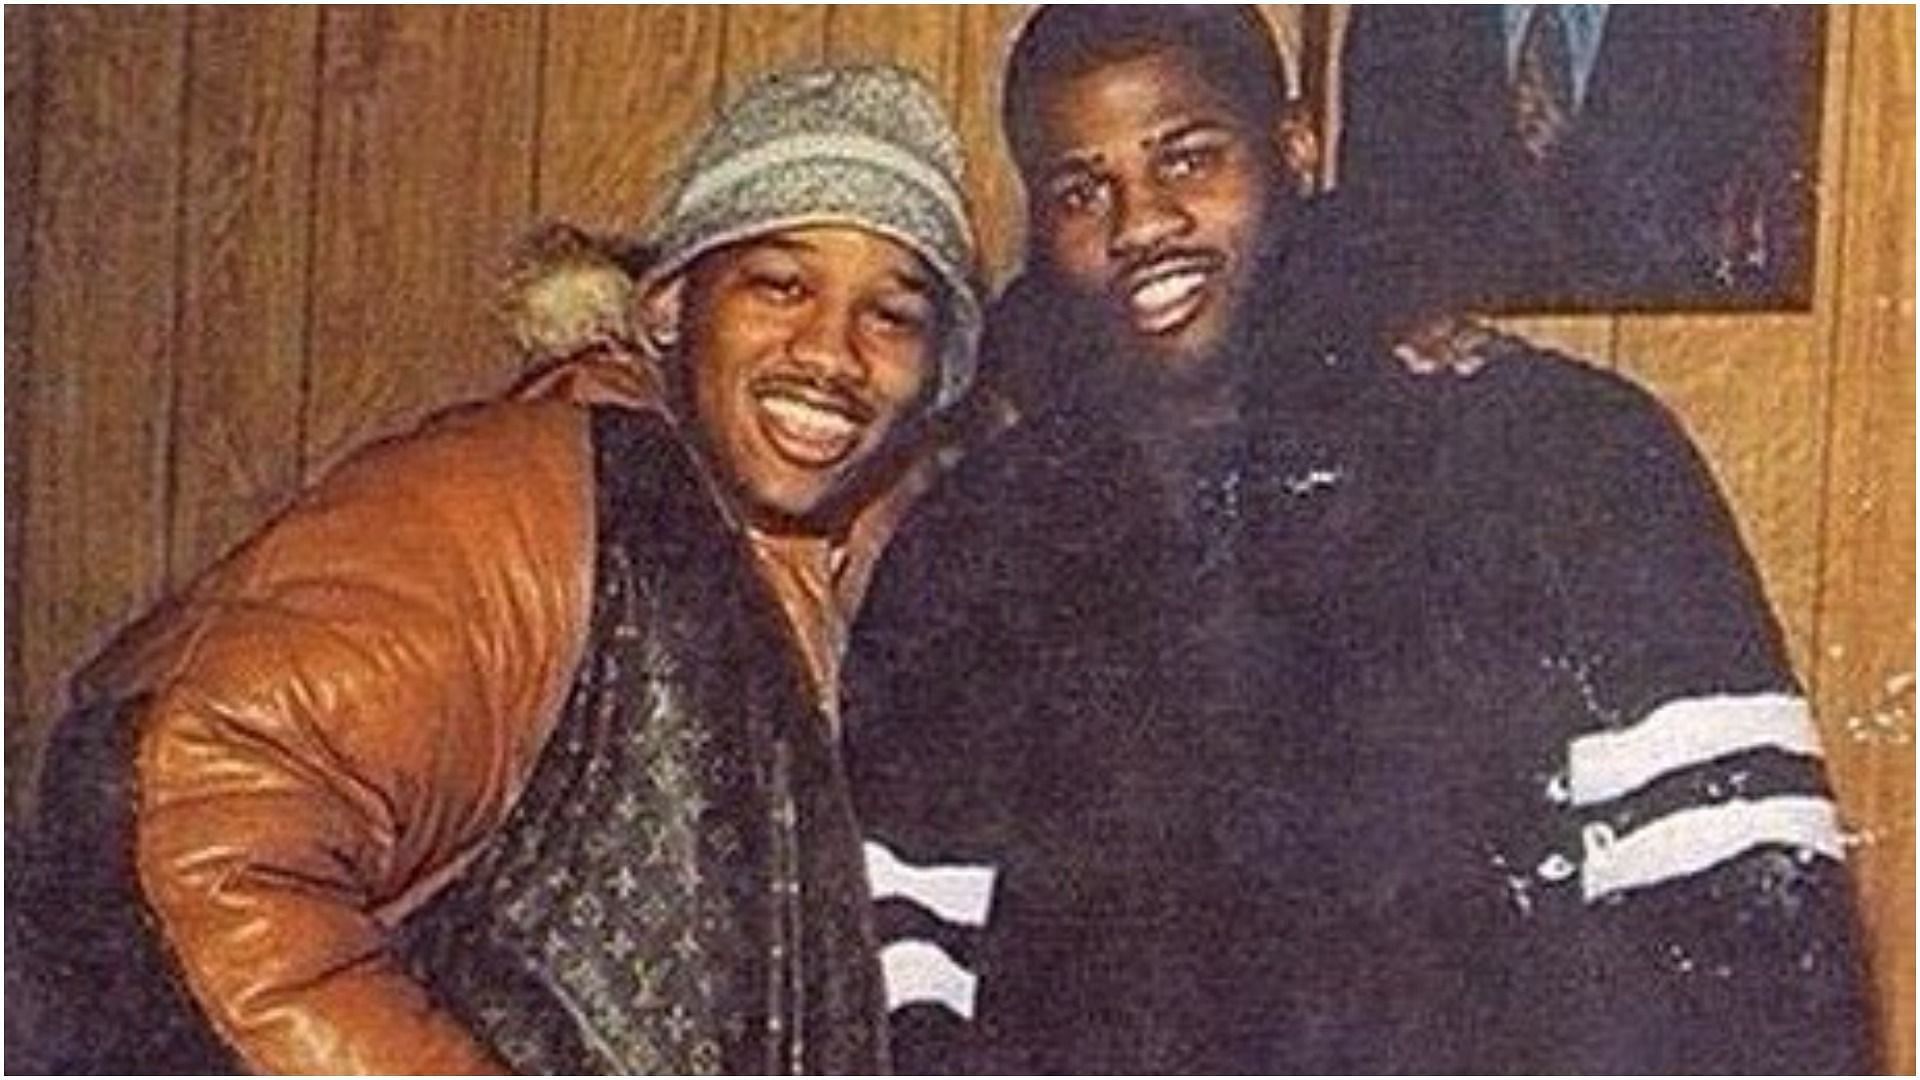 Alpo Martinez was a notorious drug dealer and arrested multiple times (Image via JustCallmeBHunt/Twitter)